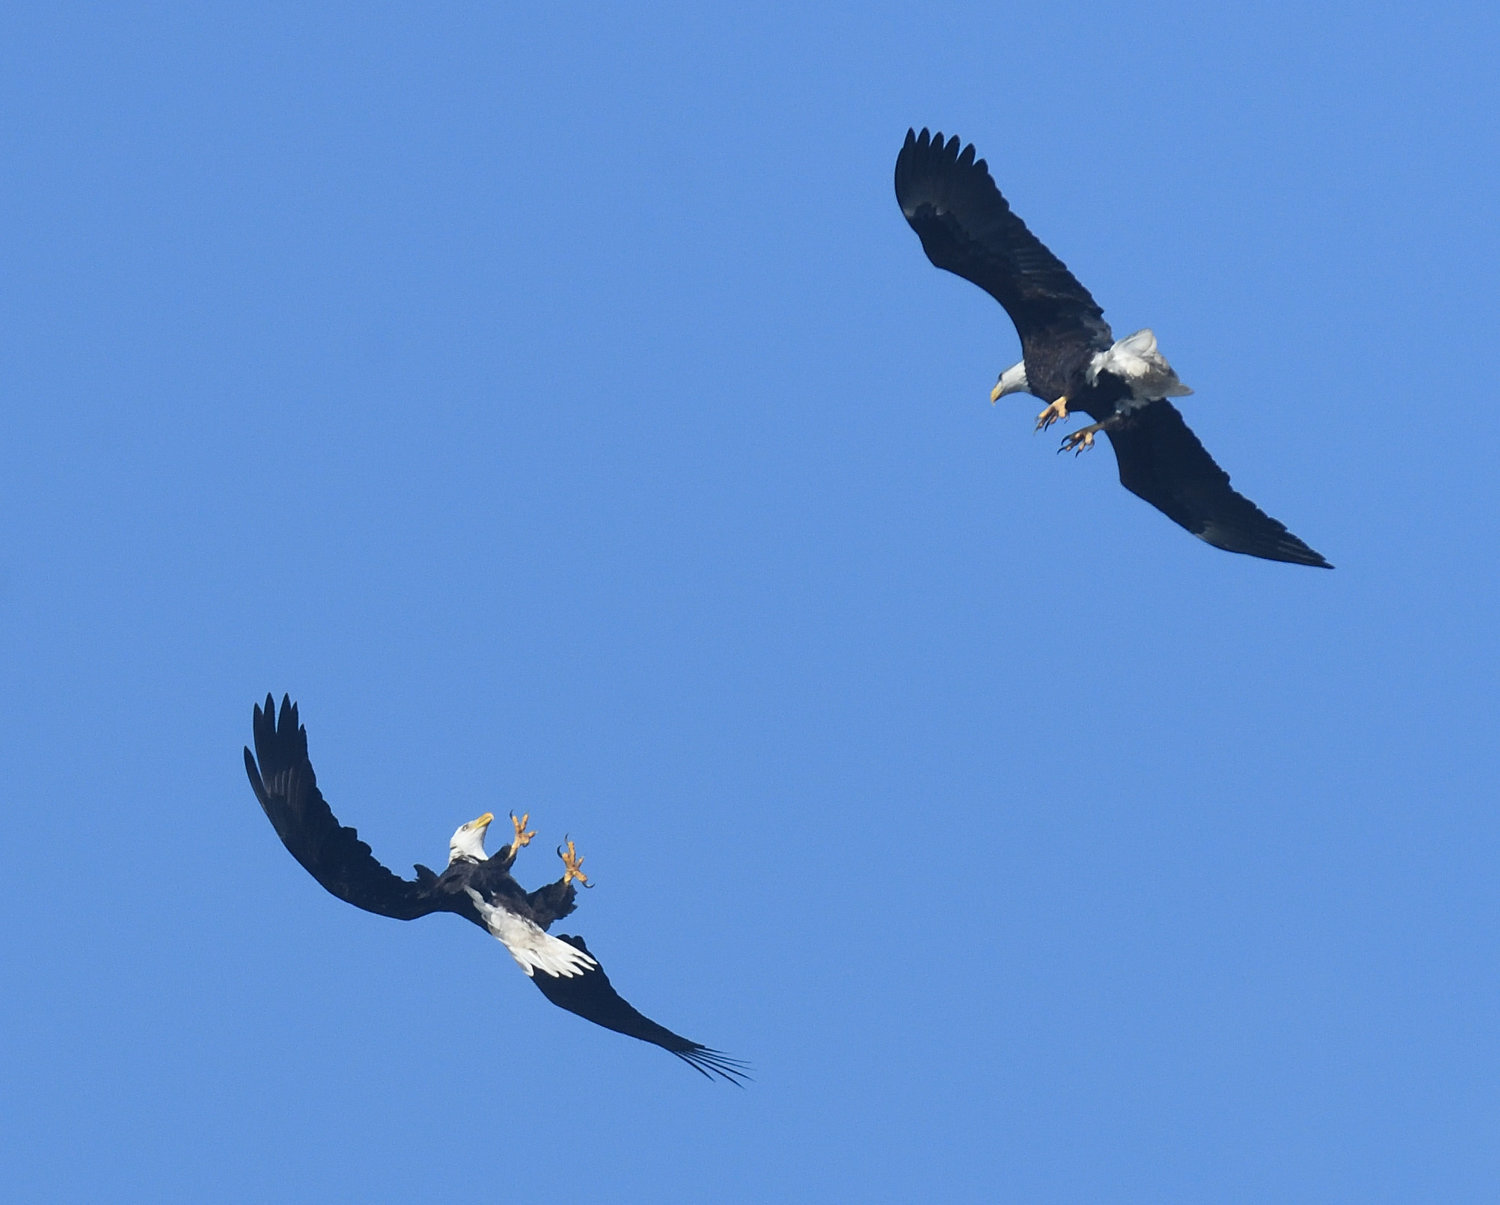 These eagles are not fighting—they are likely engaged in courtship display, or just playing. Sometimes eagles will lock talons, then spiral toward the ground together. Then they let go and recover from the spiral, sometimes at the last moment. The lower-left eagle only took a fraction of a second to roll inverted and display its talons...